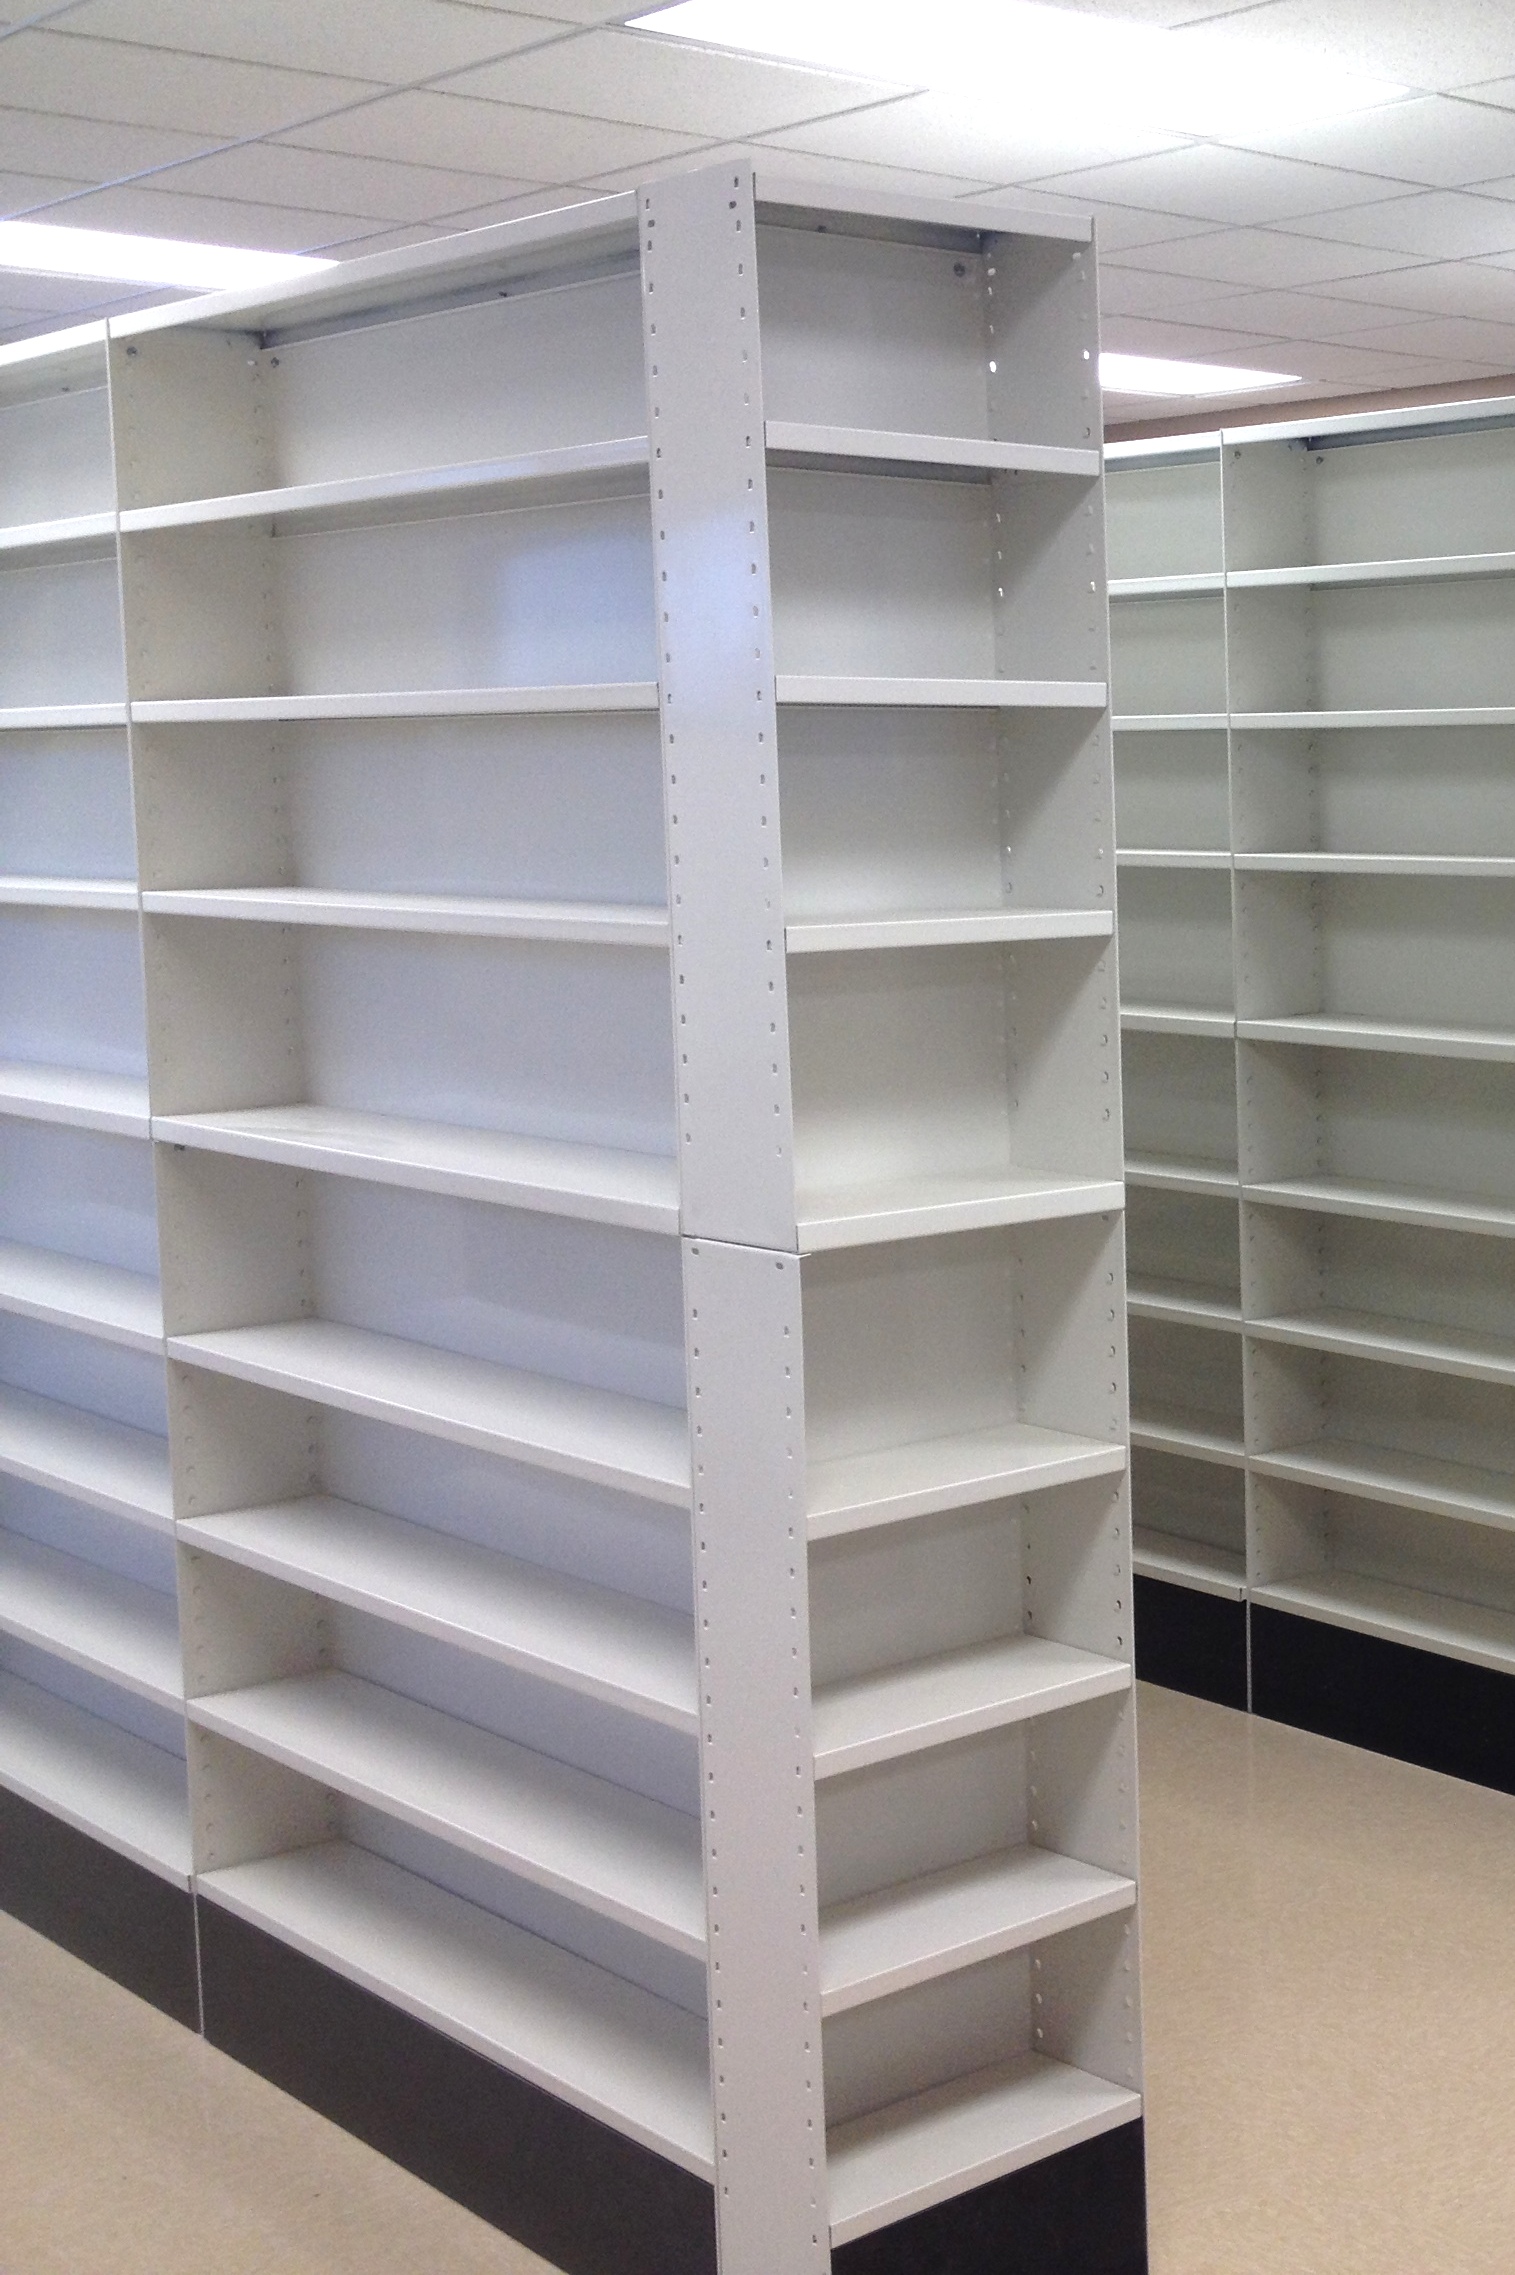 Additional Lozier Classic Shelves